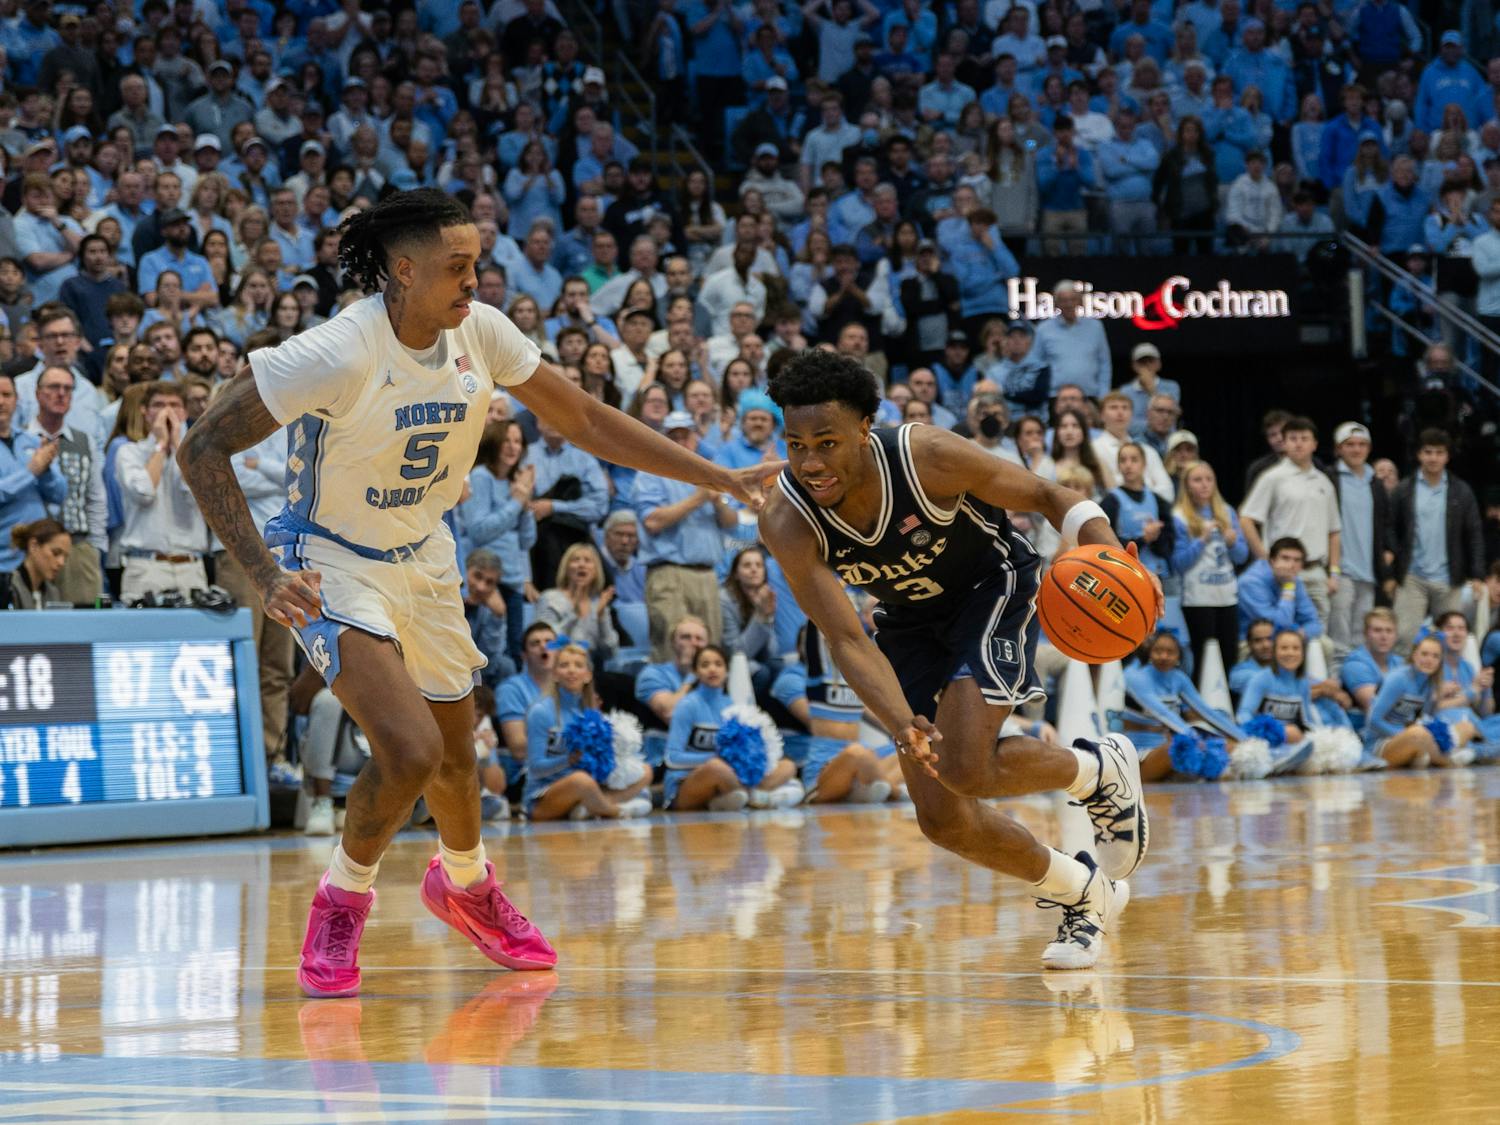 Jeremy Roach drives against North Carolina's Armando Bacot during the team's February clash.